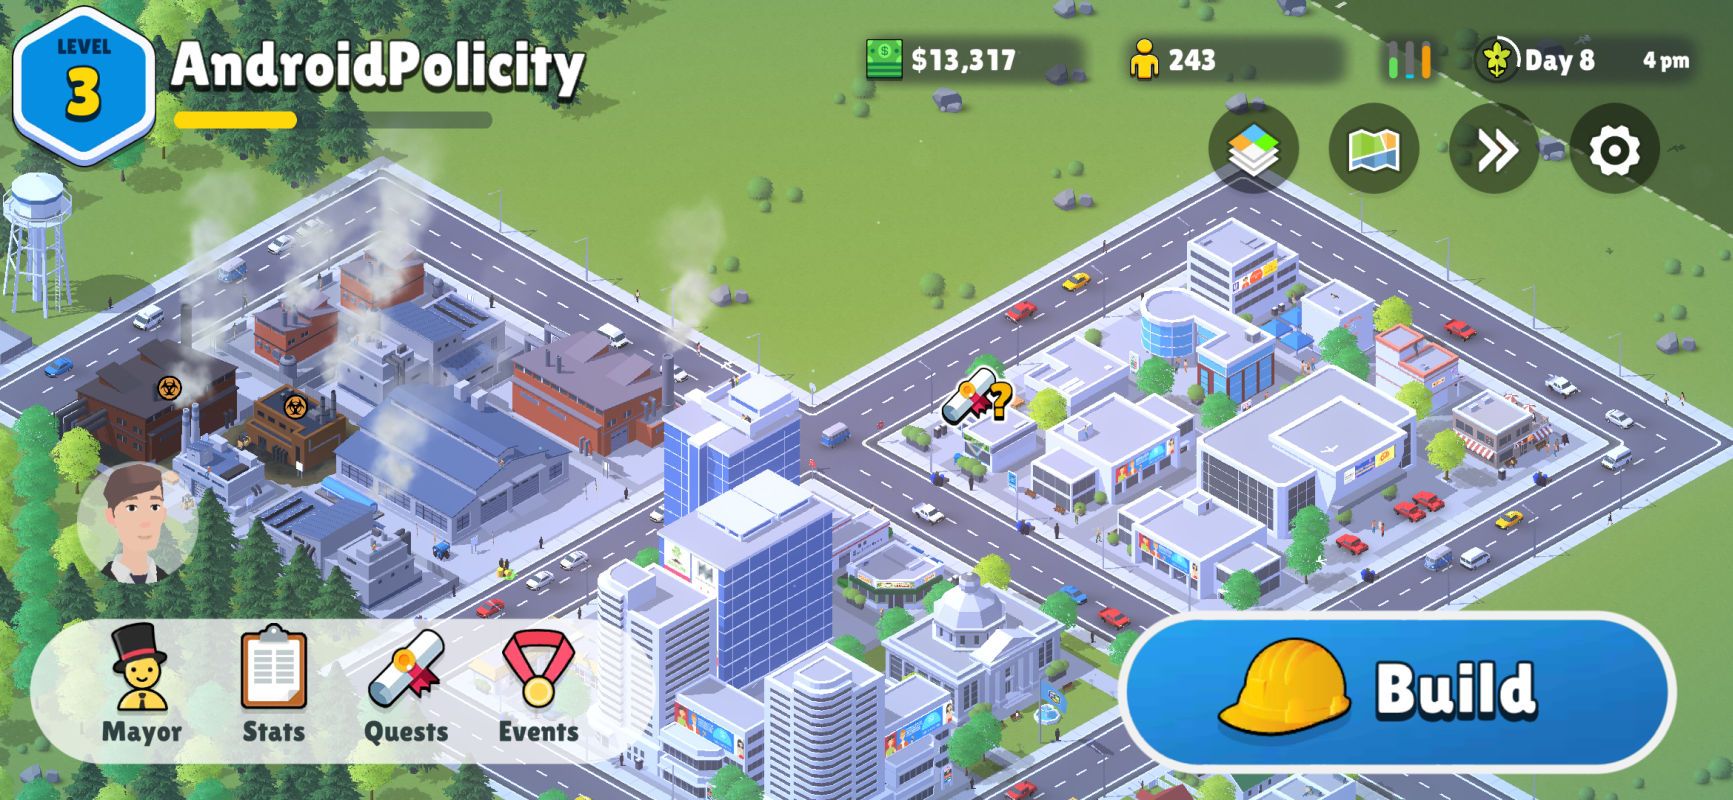 Pocket City 2 quest icon on map